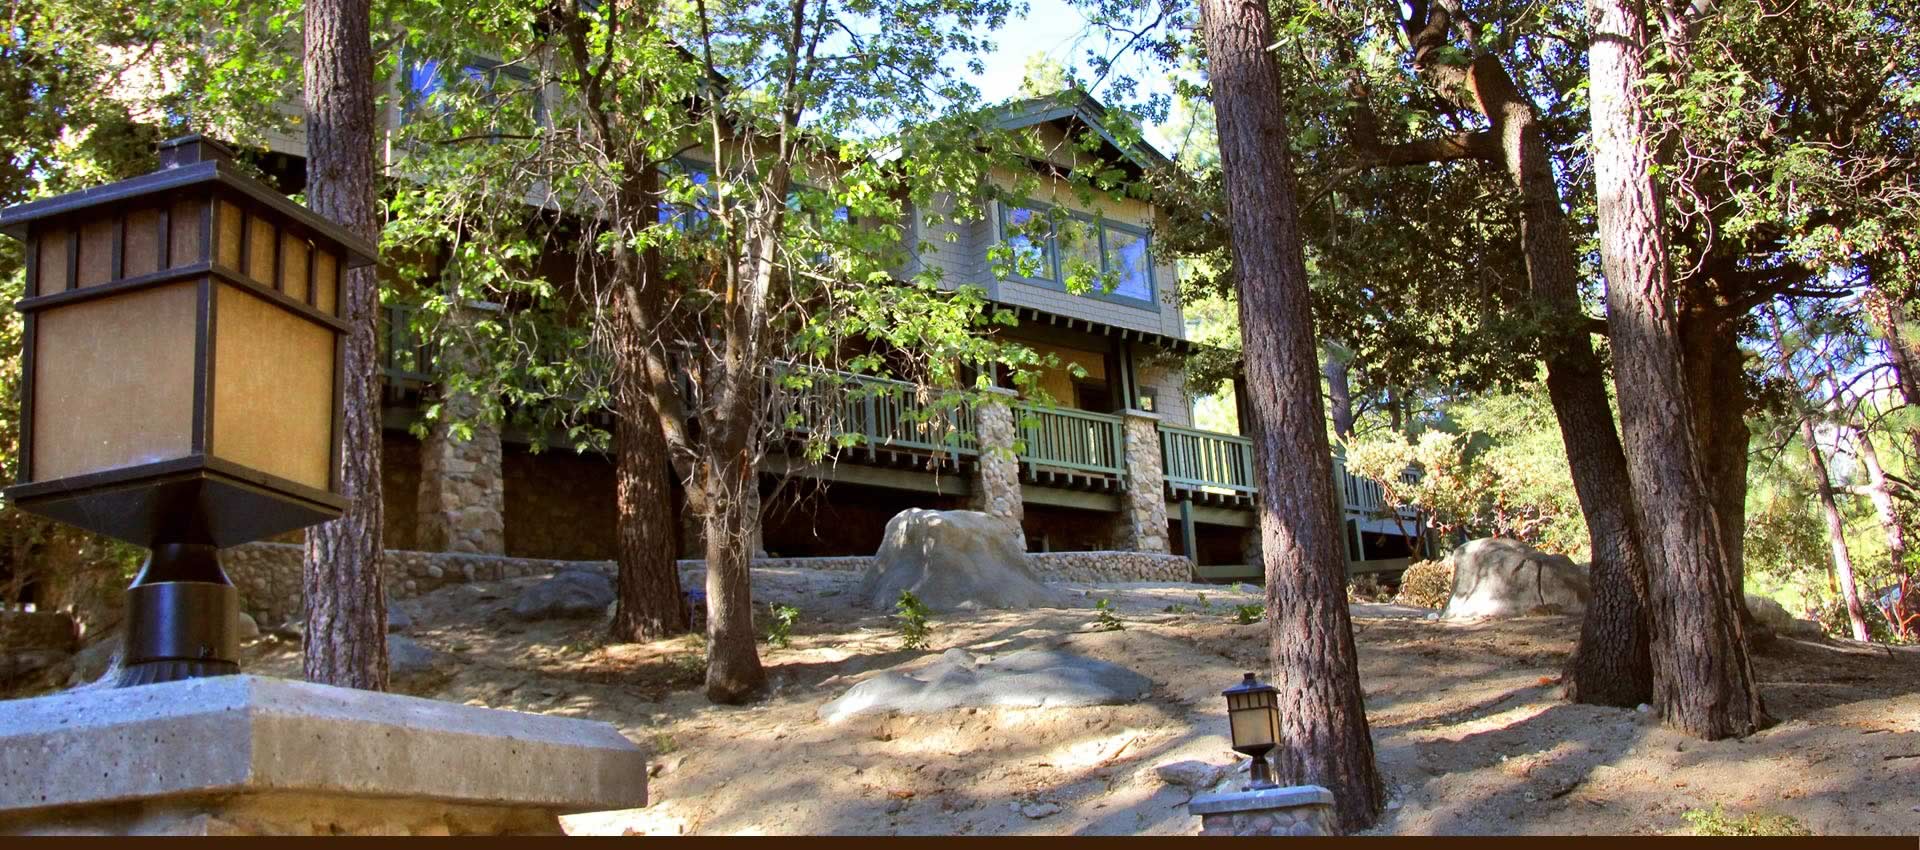 Front view of The Grand Idyllwild Lodge